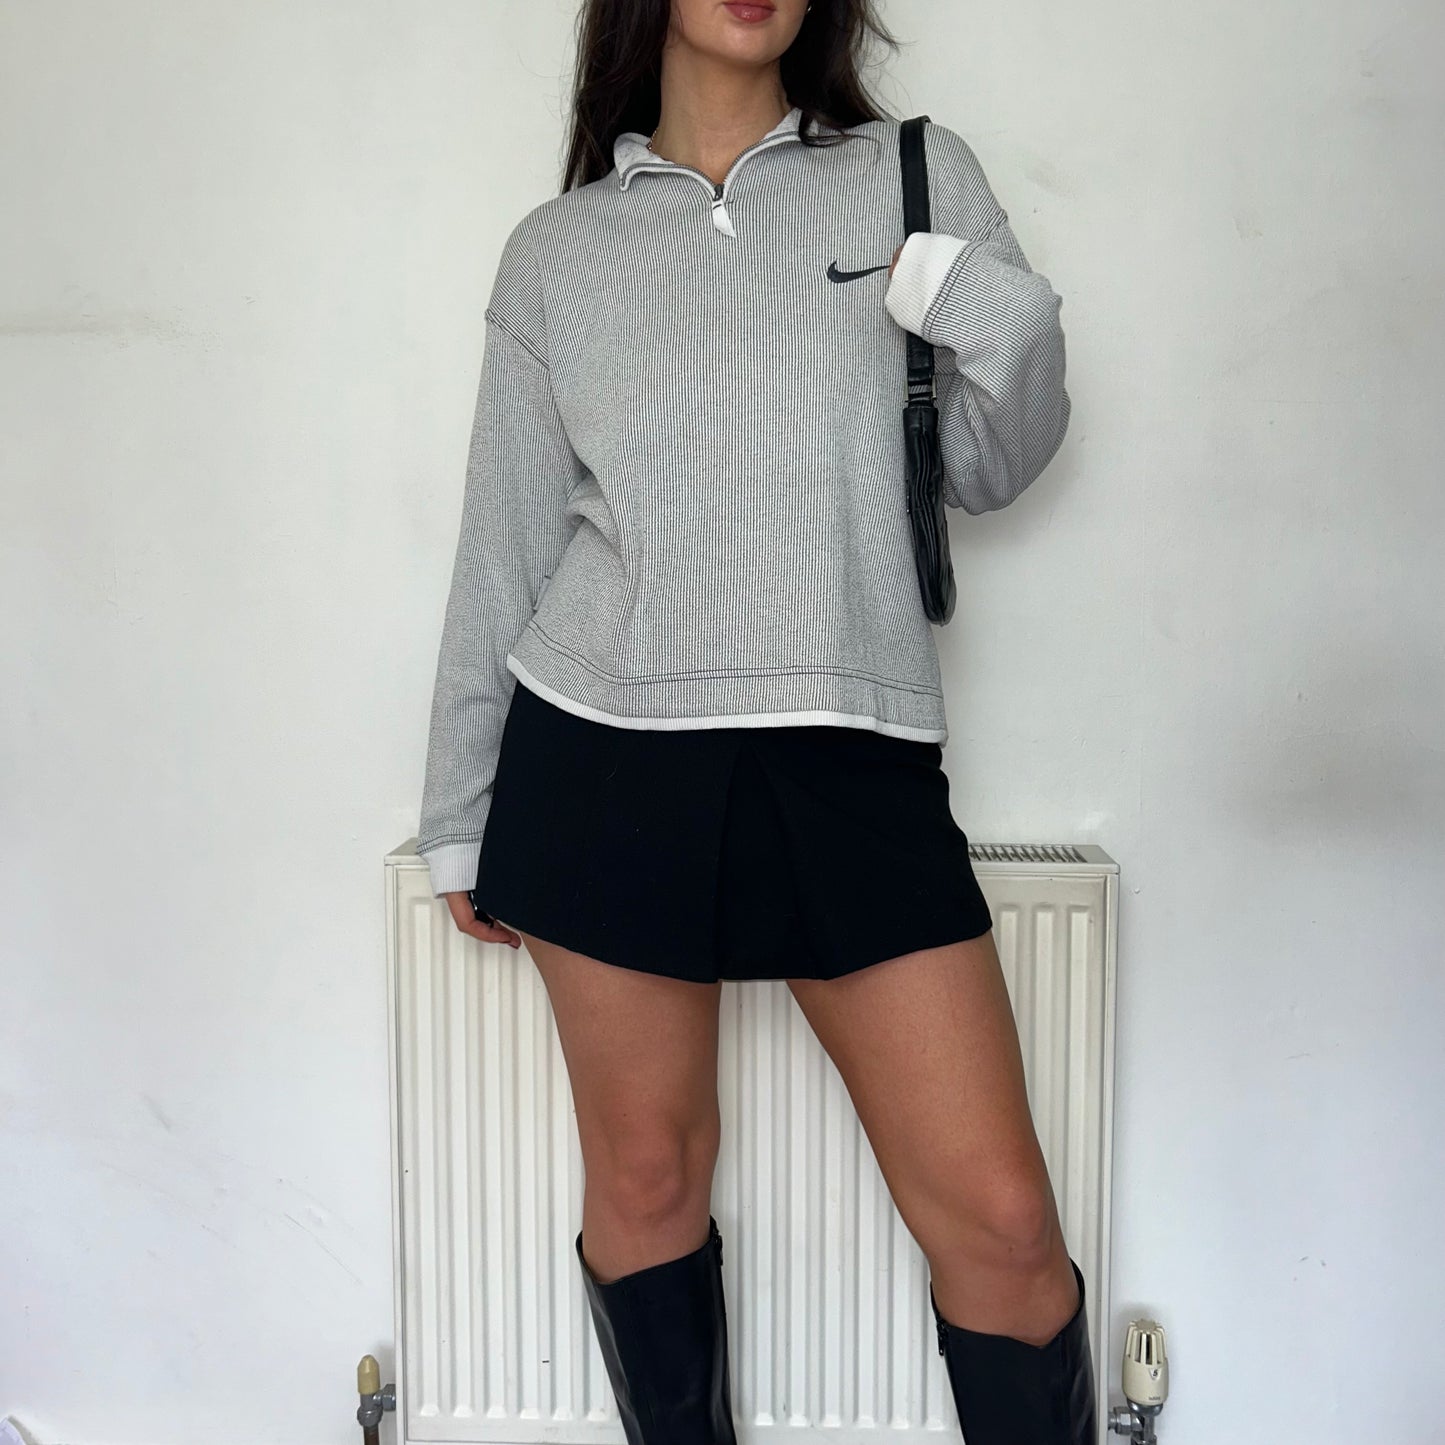 grey nike stripe 1/4 zip jumper shown on a model wearing a black mini skirt and black boots with a black shoulder bag